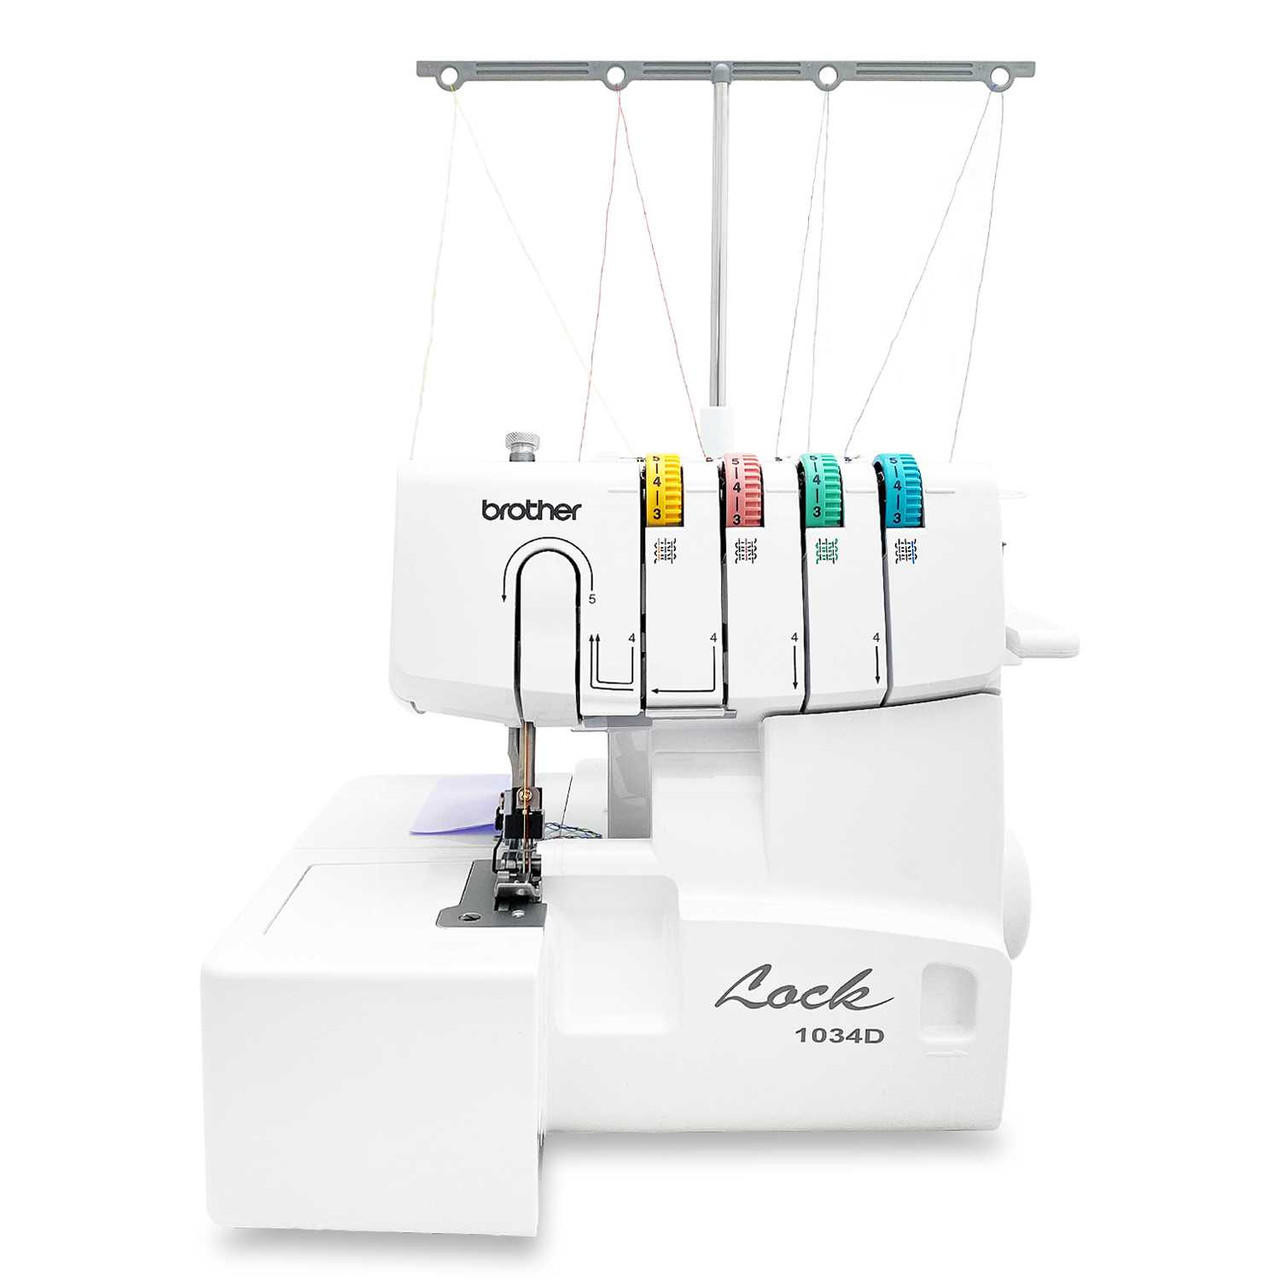 Sewing Machine Review: Brother 1034D Serger 